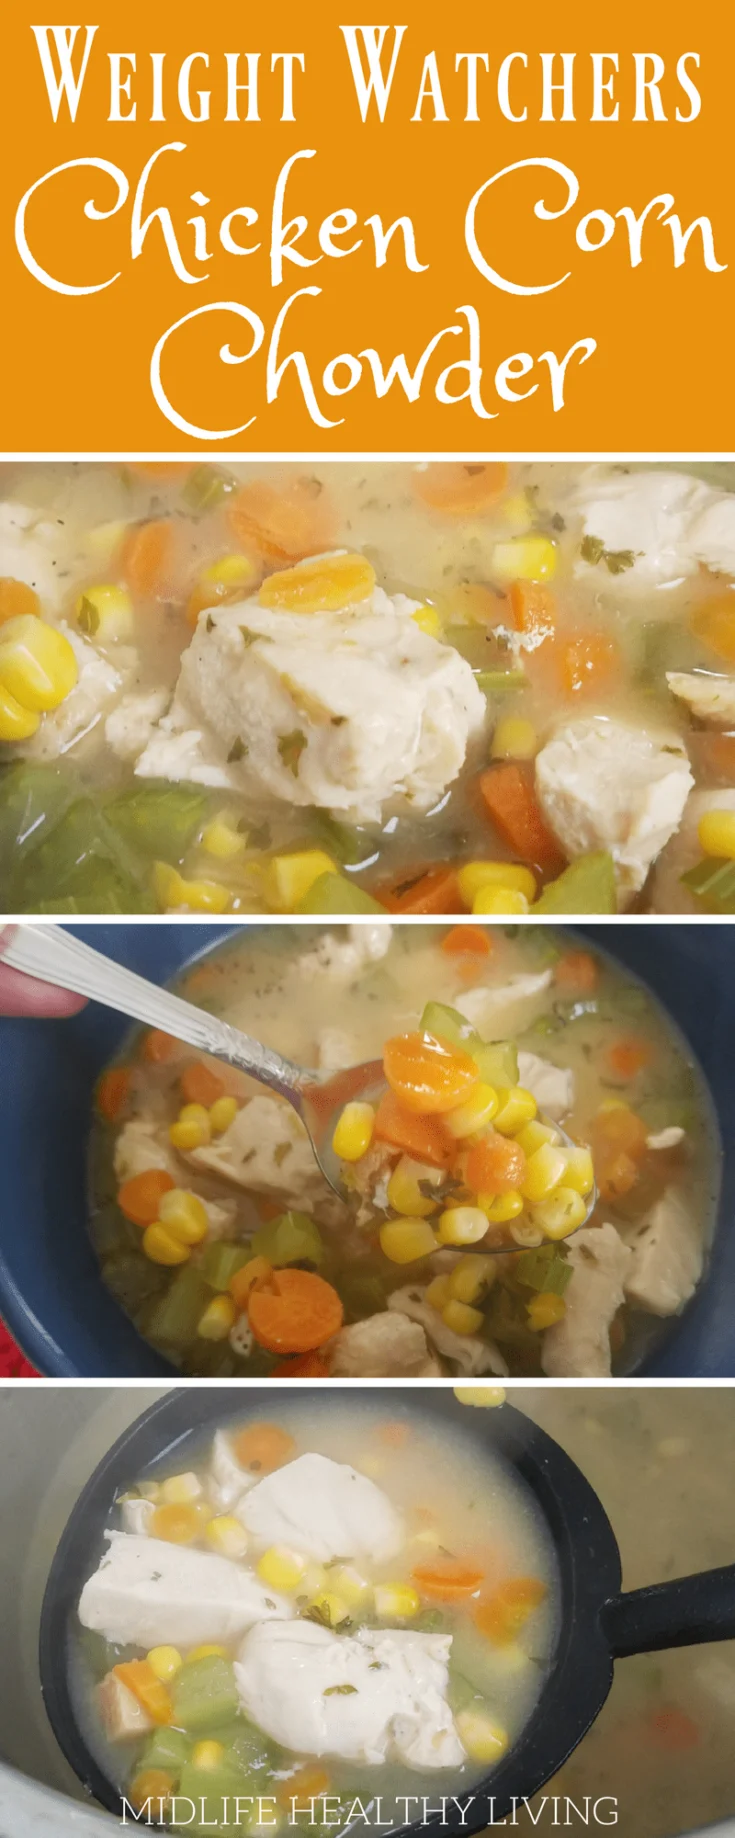 Make our Chicken Corn Chowder in the Instant Pot in under 30 minutes! A delicious and easy meal everyone loves!